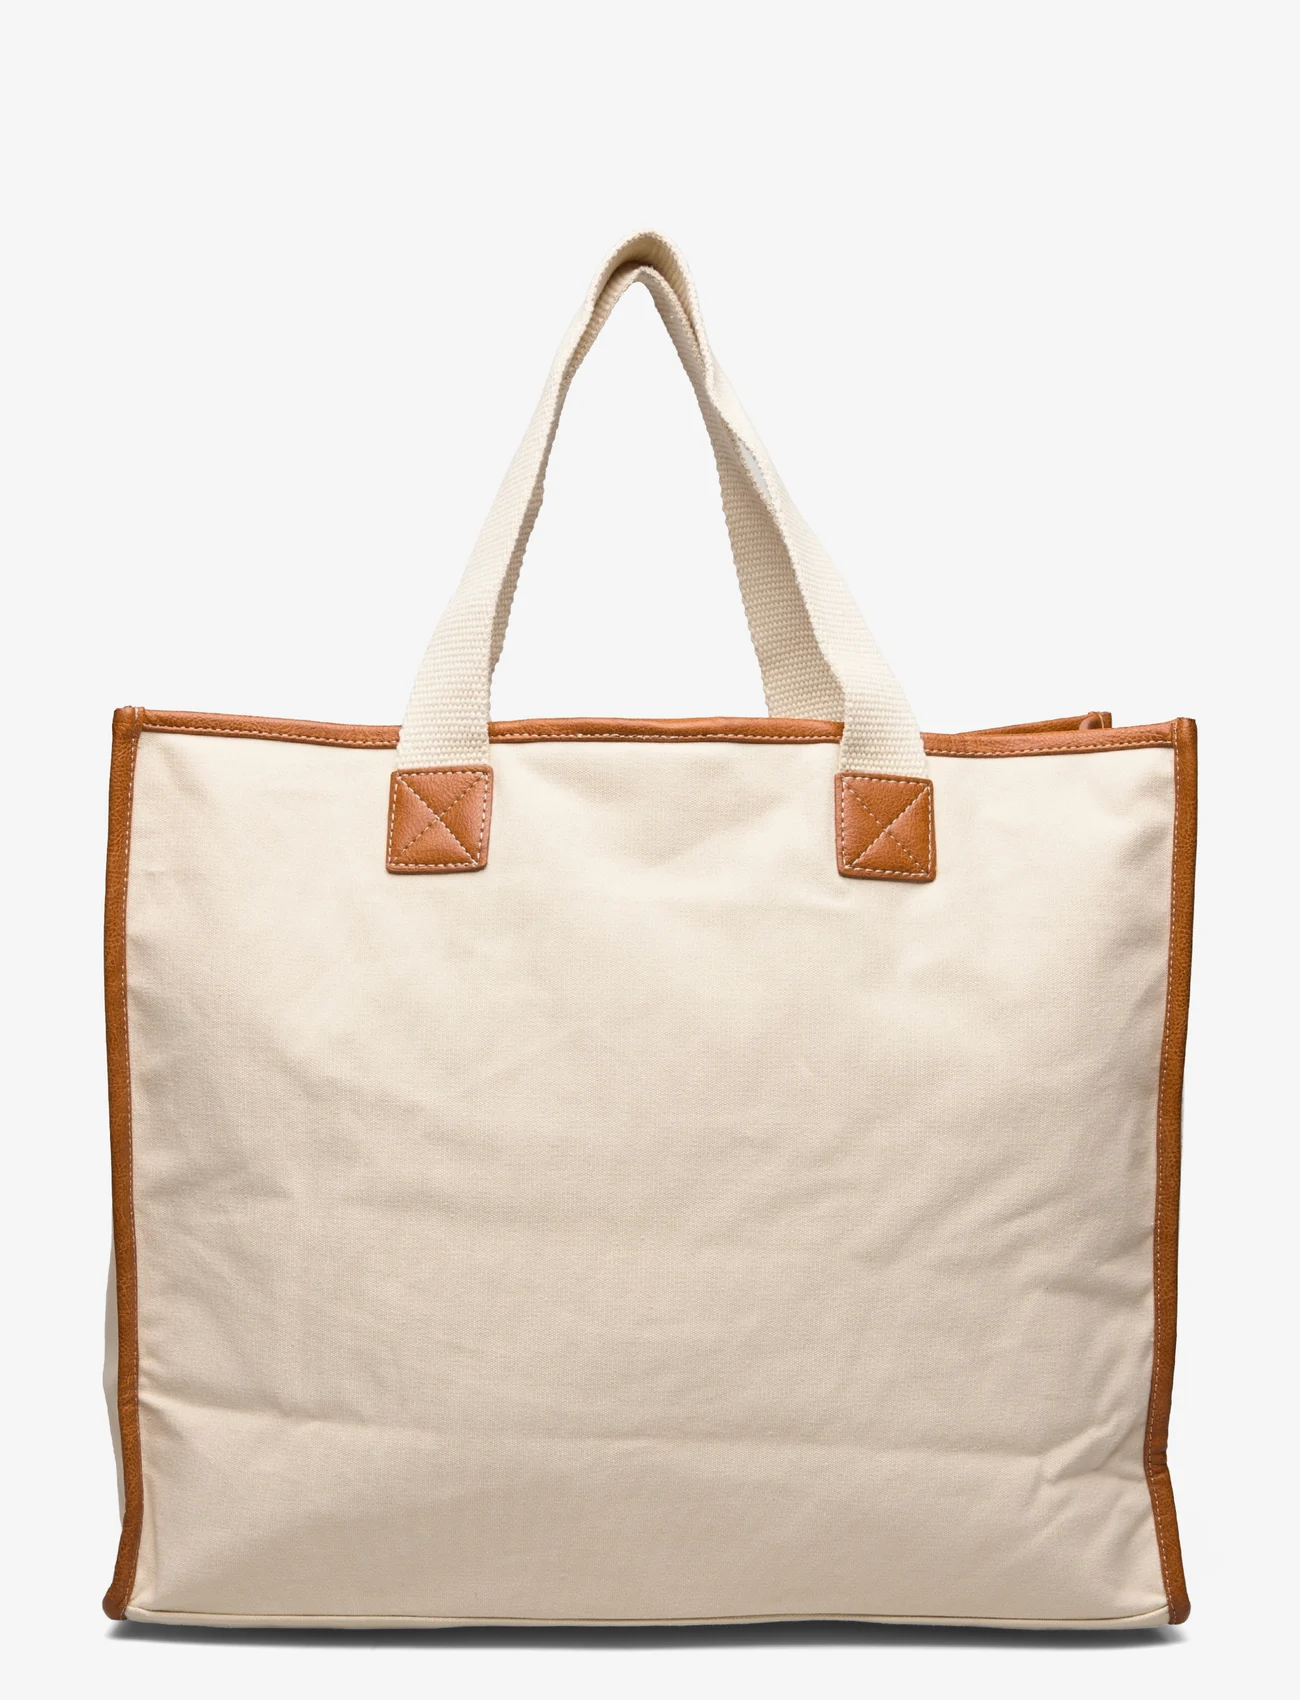 Seafolly - CarriedAway Canvas Tote - torby tote - sand - 1